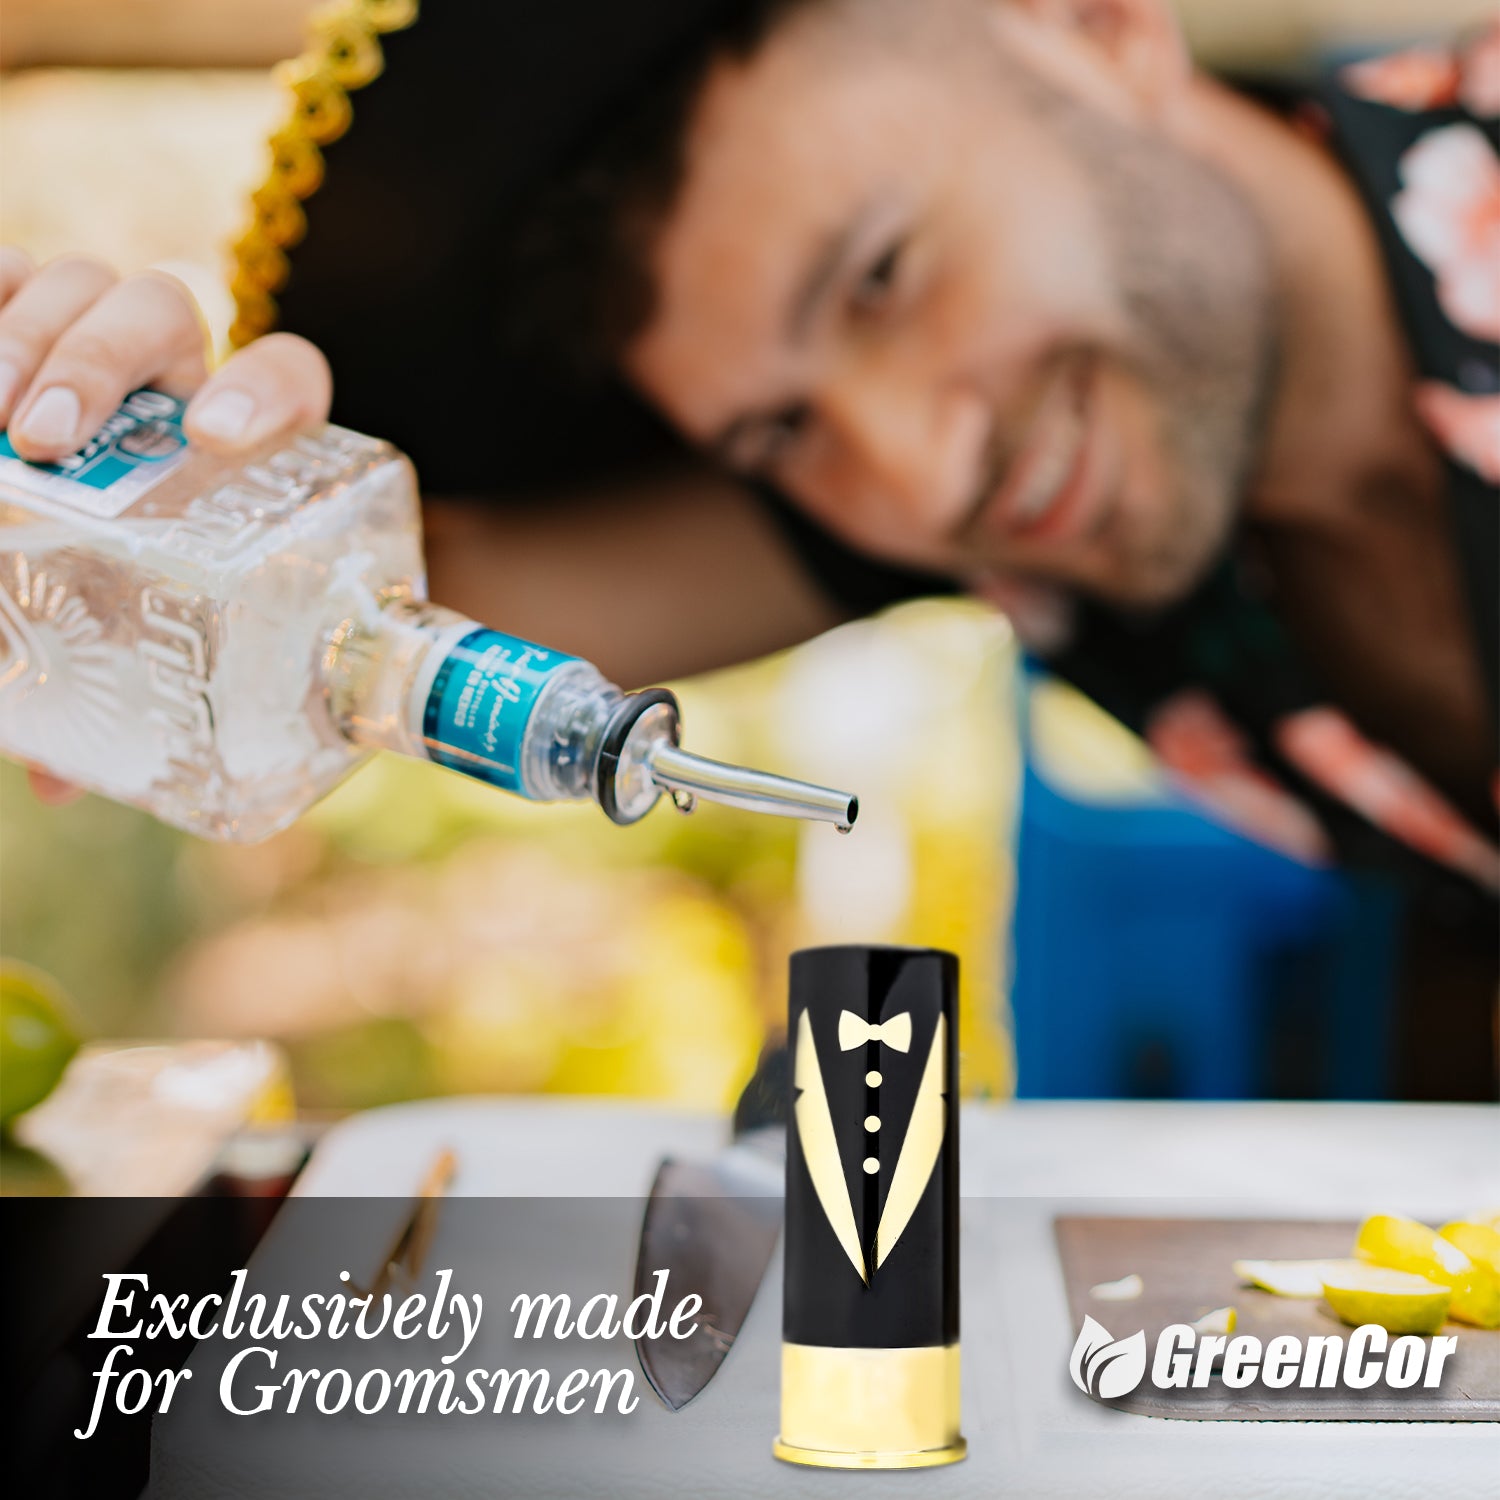 The Perfect Gift for the Groomsmen!